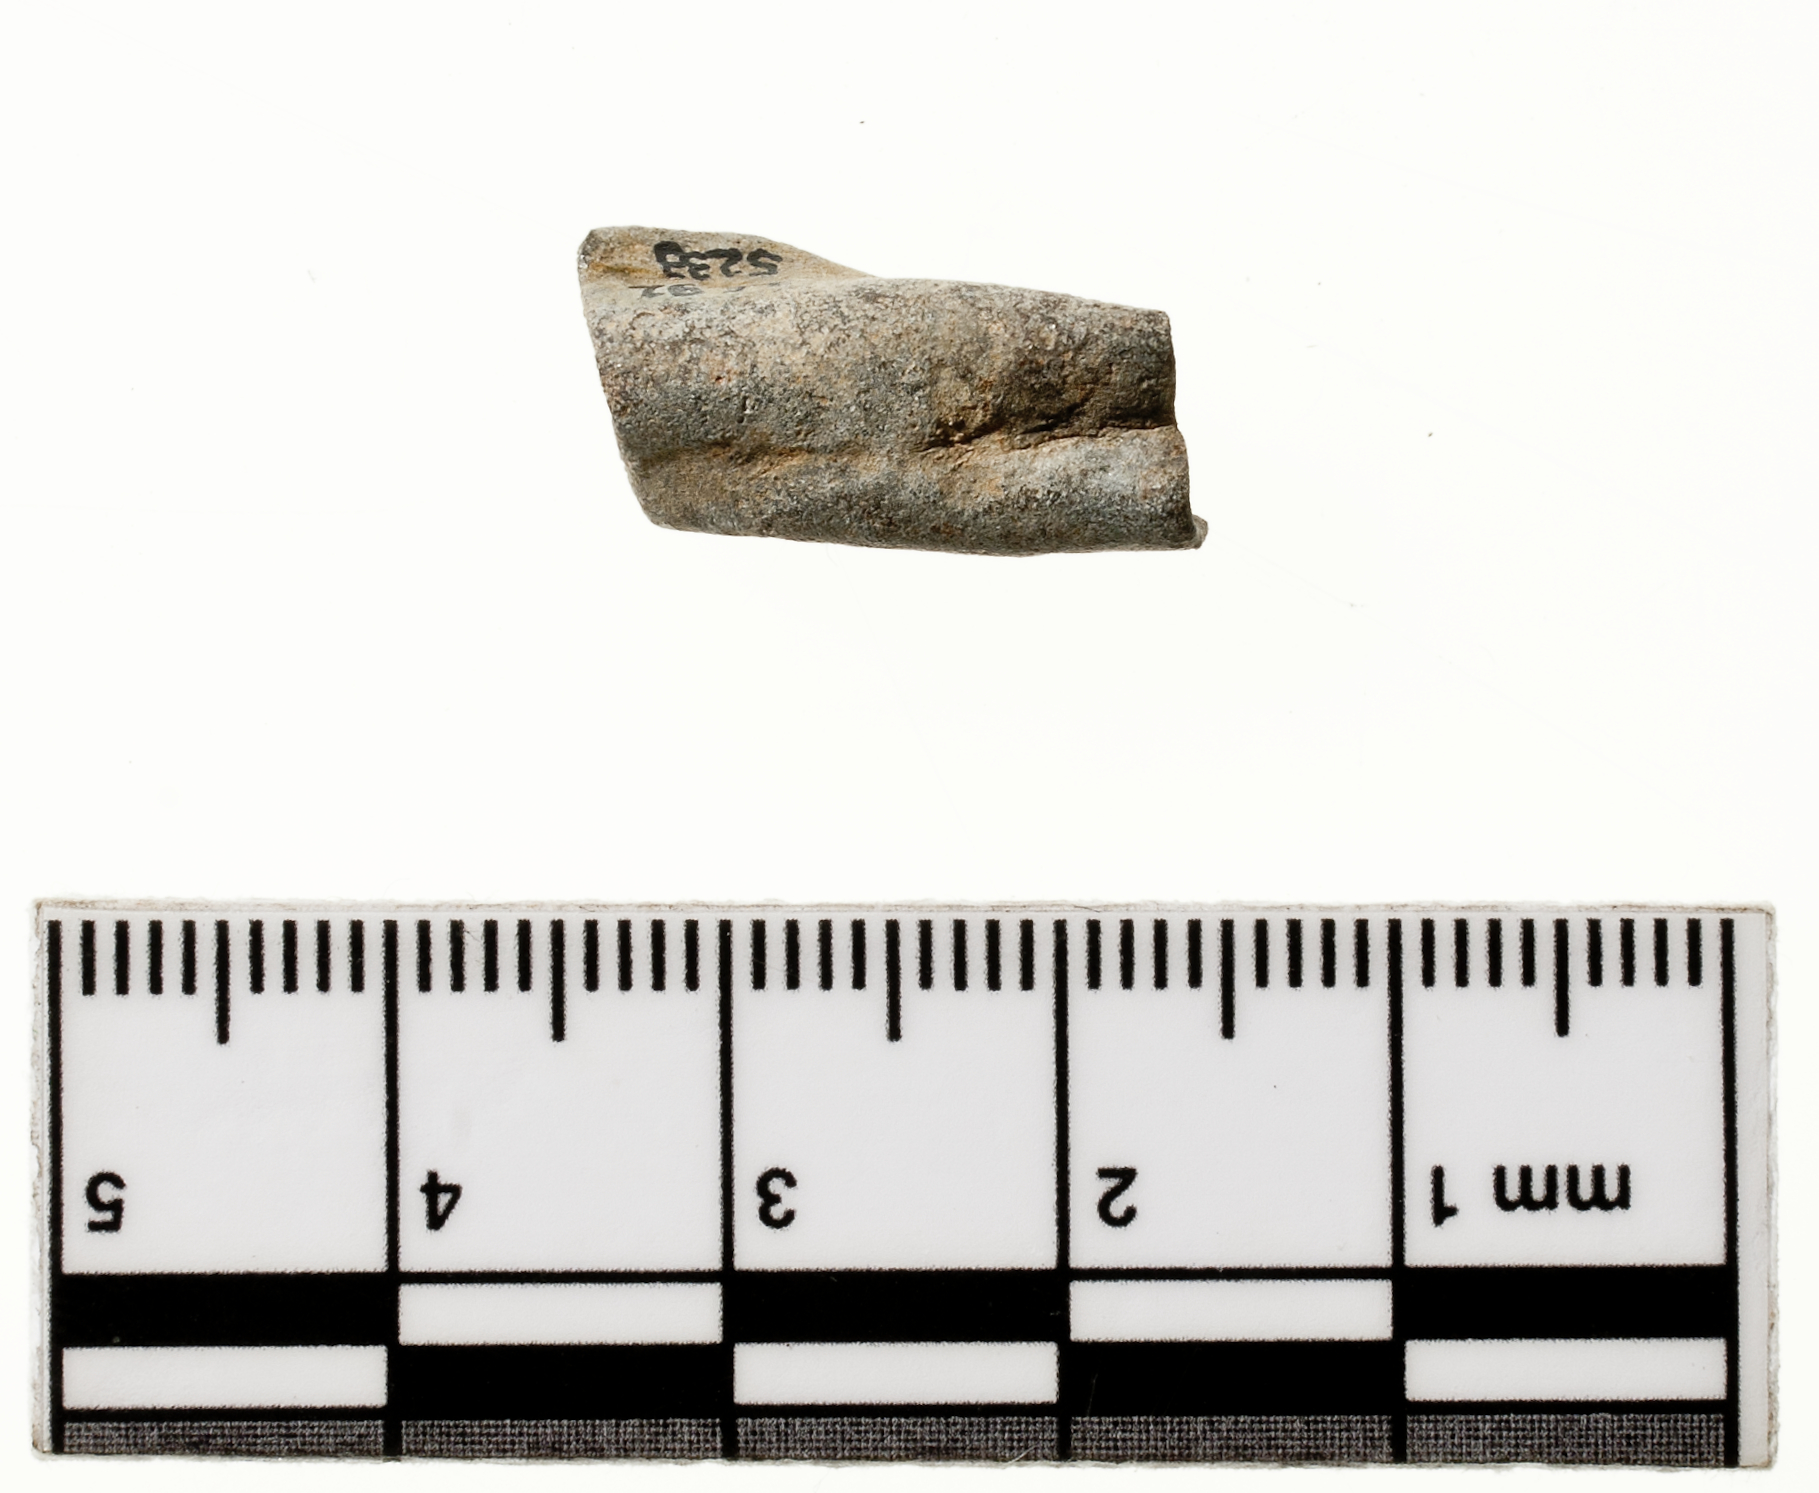 Medieval / Post-Medieval lead objects